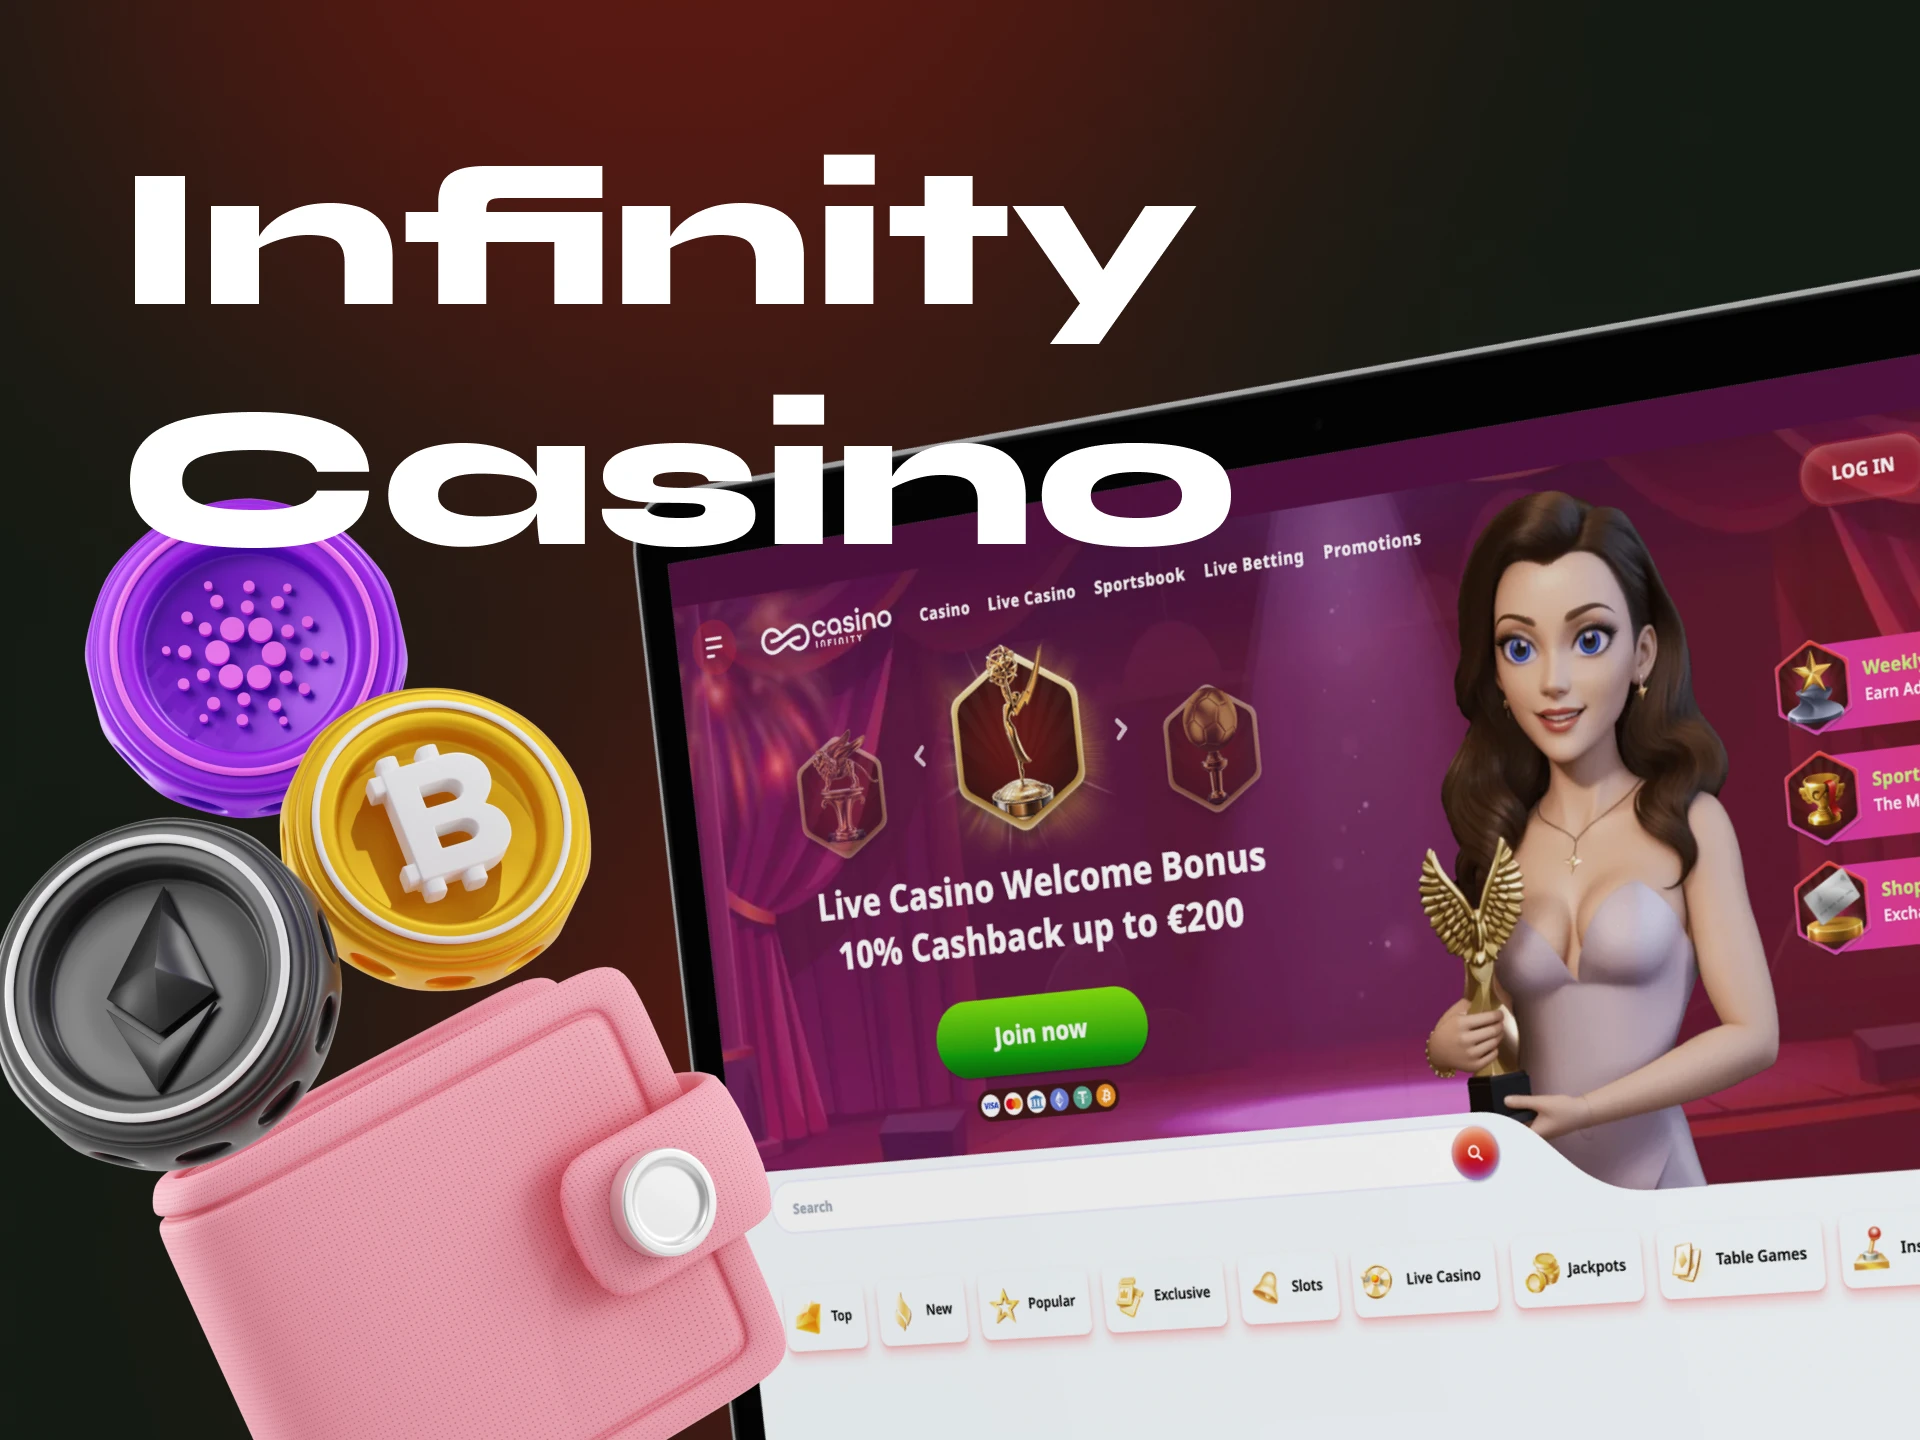 Is there a VIP program at the online casino Infinity Casino.